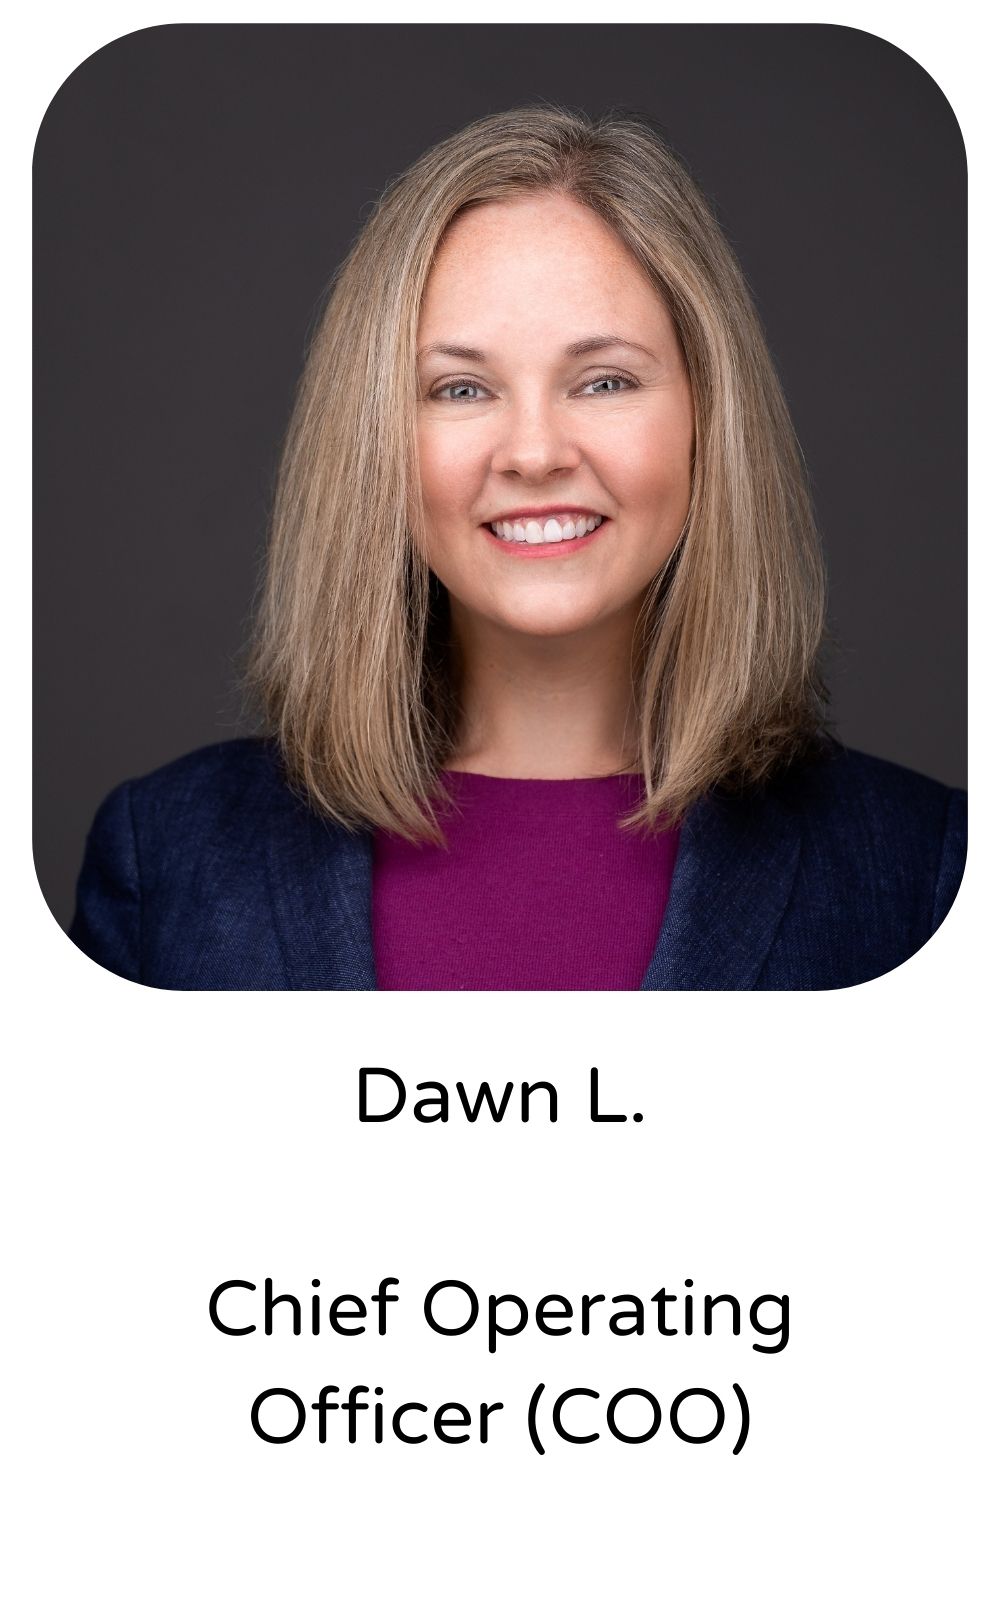 Dawn L, Chief Operating Officer